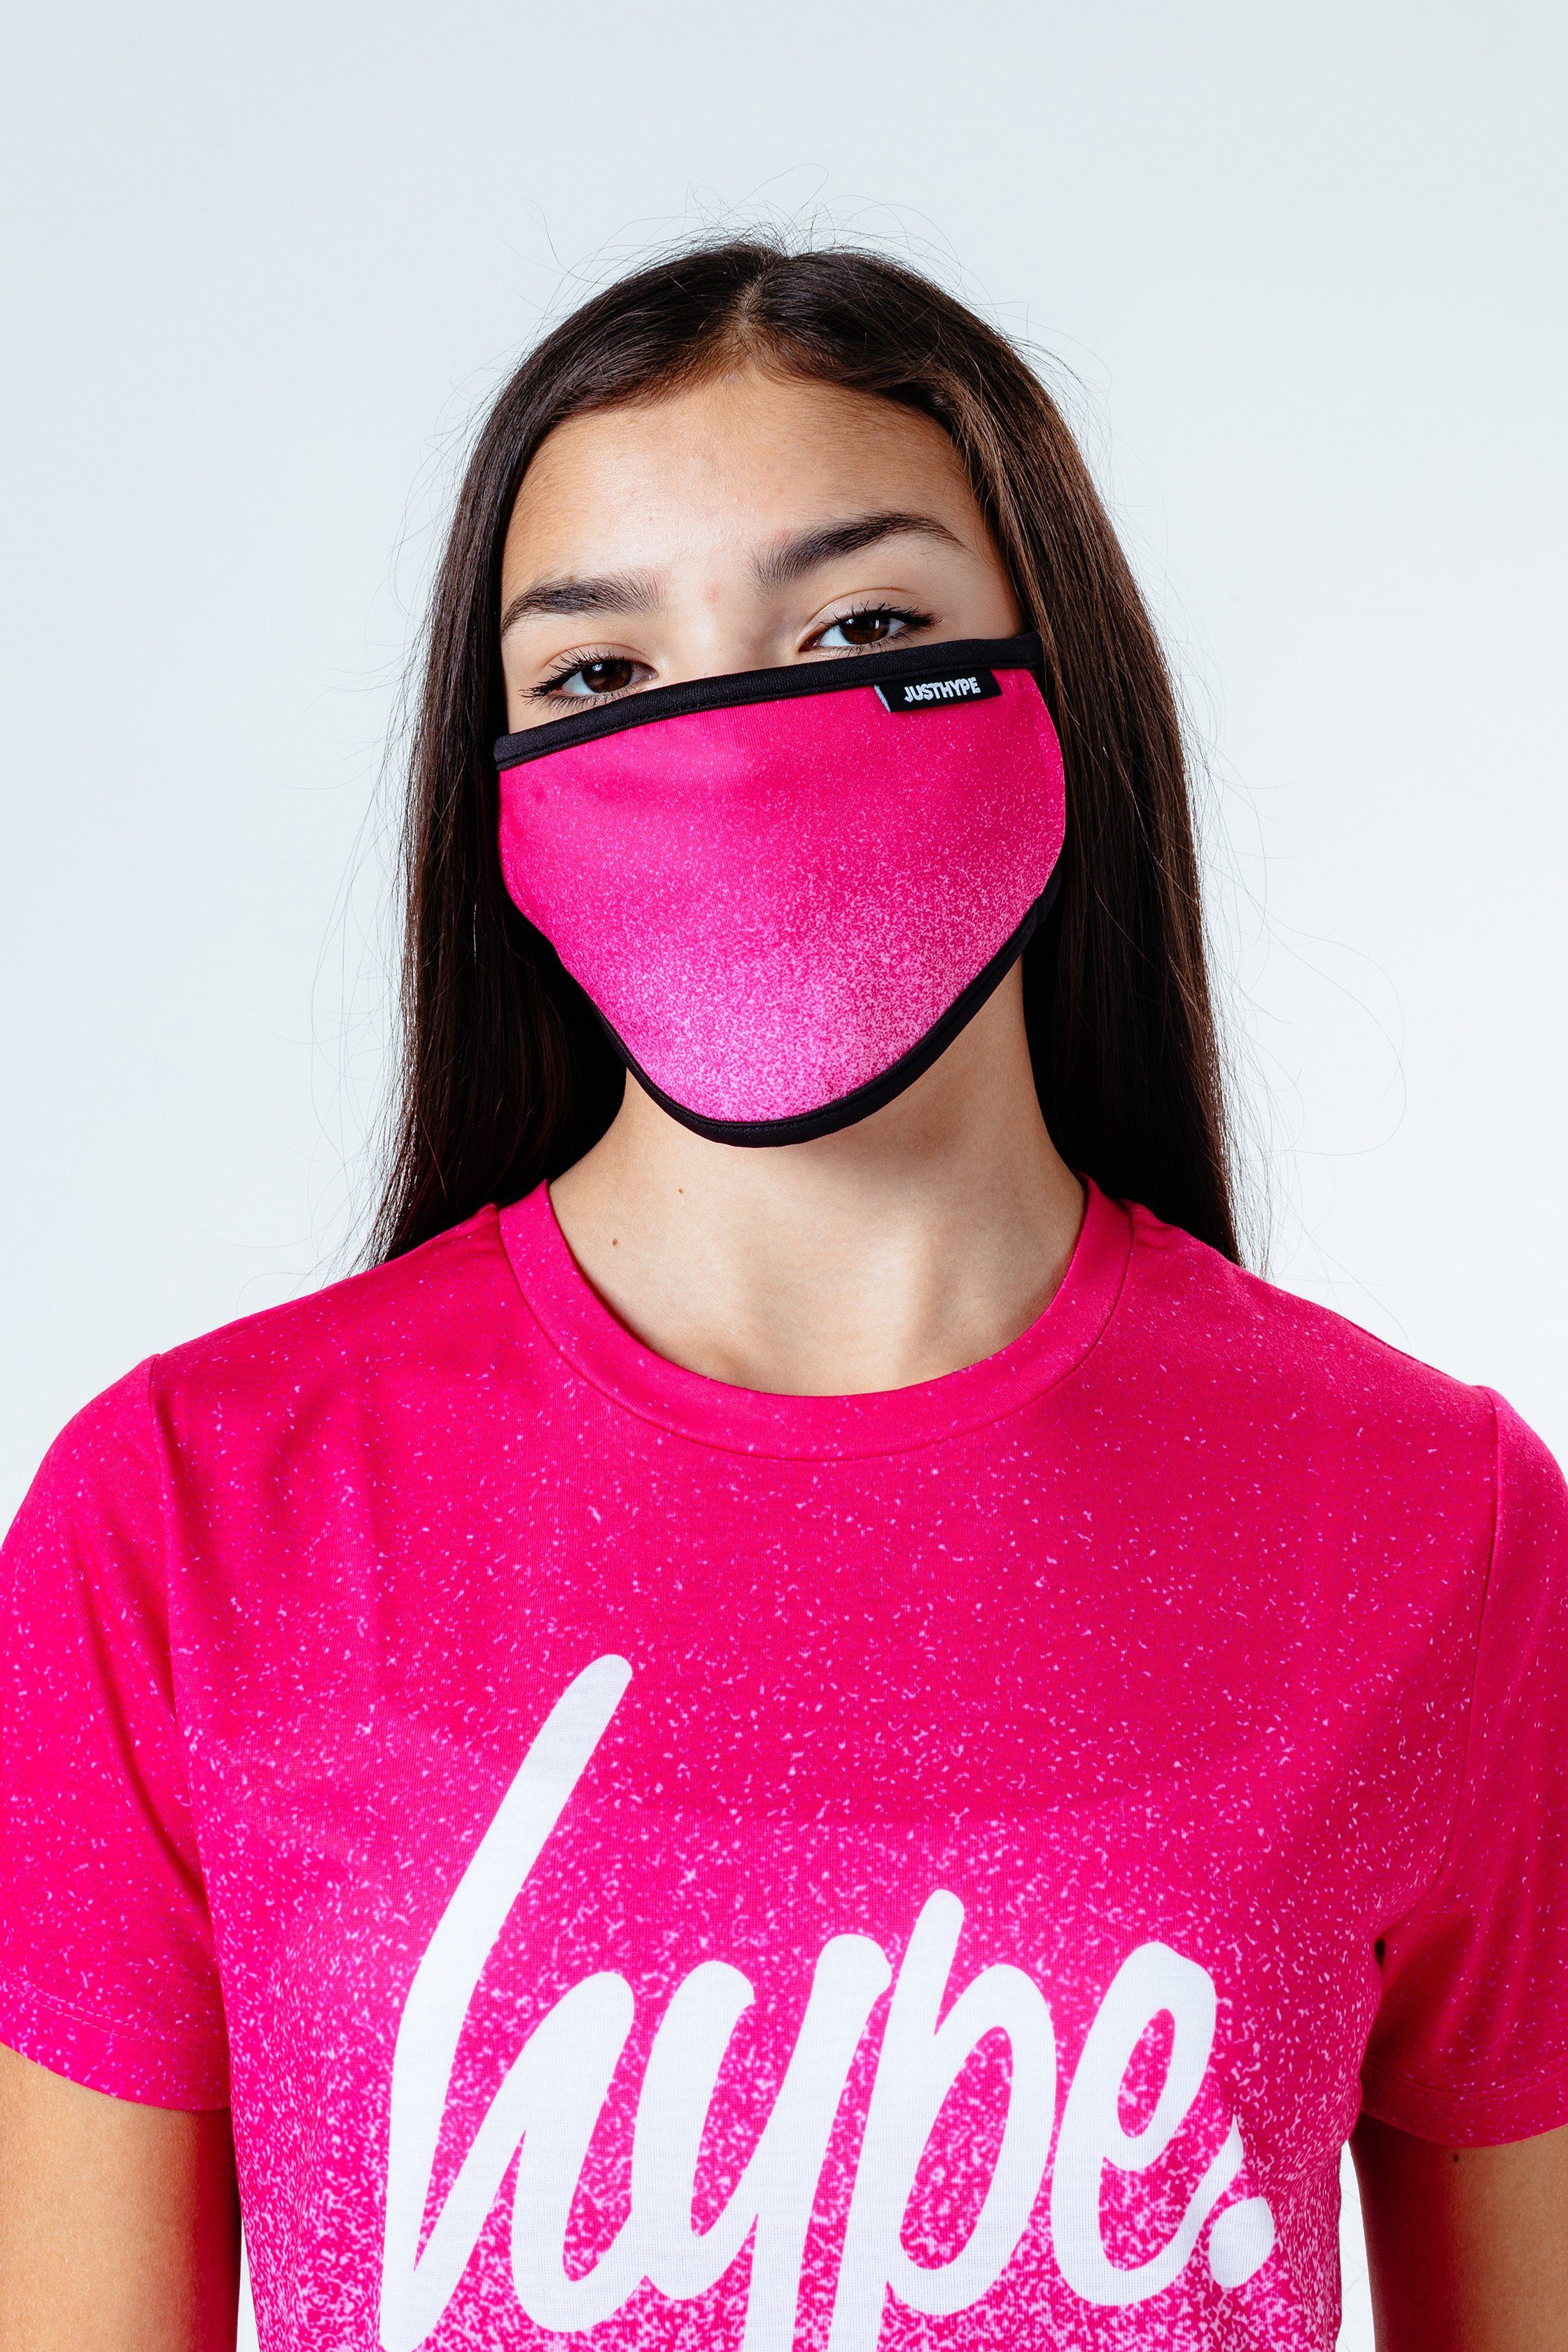 If you love pink, this is the combo you need to add to your everyday 'drobe. The HYPE. kids pink speckle t-shirt and face mask set, perfect for those who love to co-ordinate. Designed in our iconic speckle fade print in a pink and white colour palette. The T-shirt features our unisex standard t-shirt shape, with a crew neckline and short sleeves, finished with the supreme amount of comfort. The face masks is in a kids size, with an ear loop design in the perfect amount of comfort and breathing space you require. Machine wash at 30 degrees.